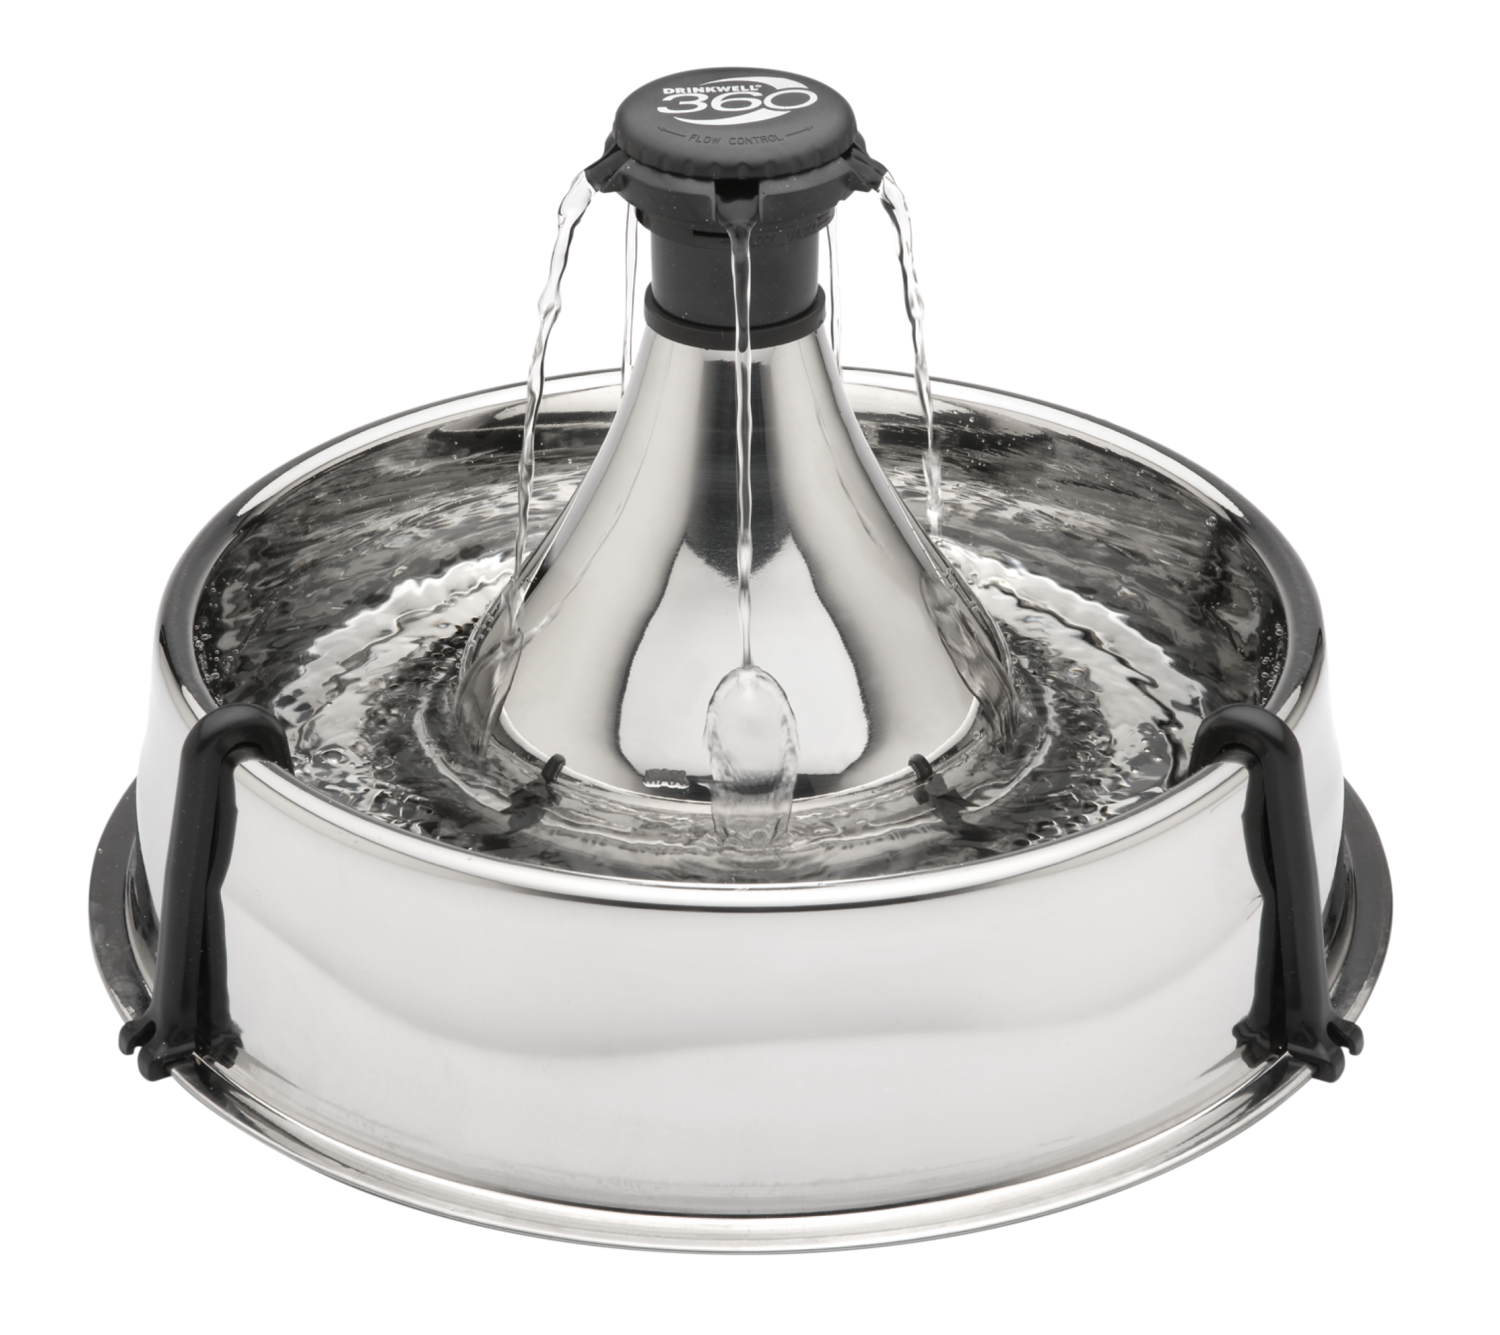 PetSafe® Drinkwell® Stainless Multi-Pet Pet Fountain. 3.8 L